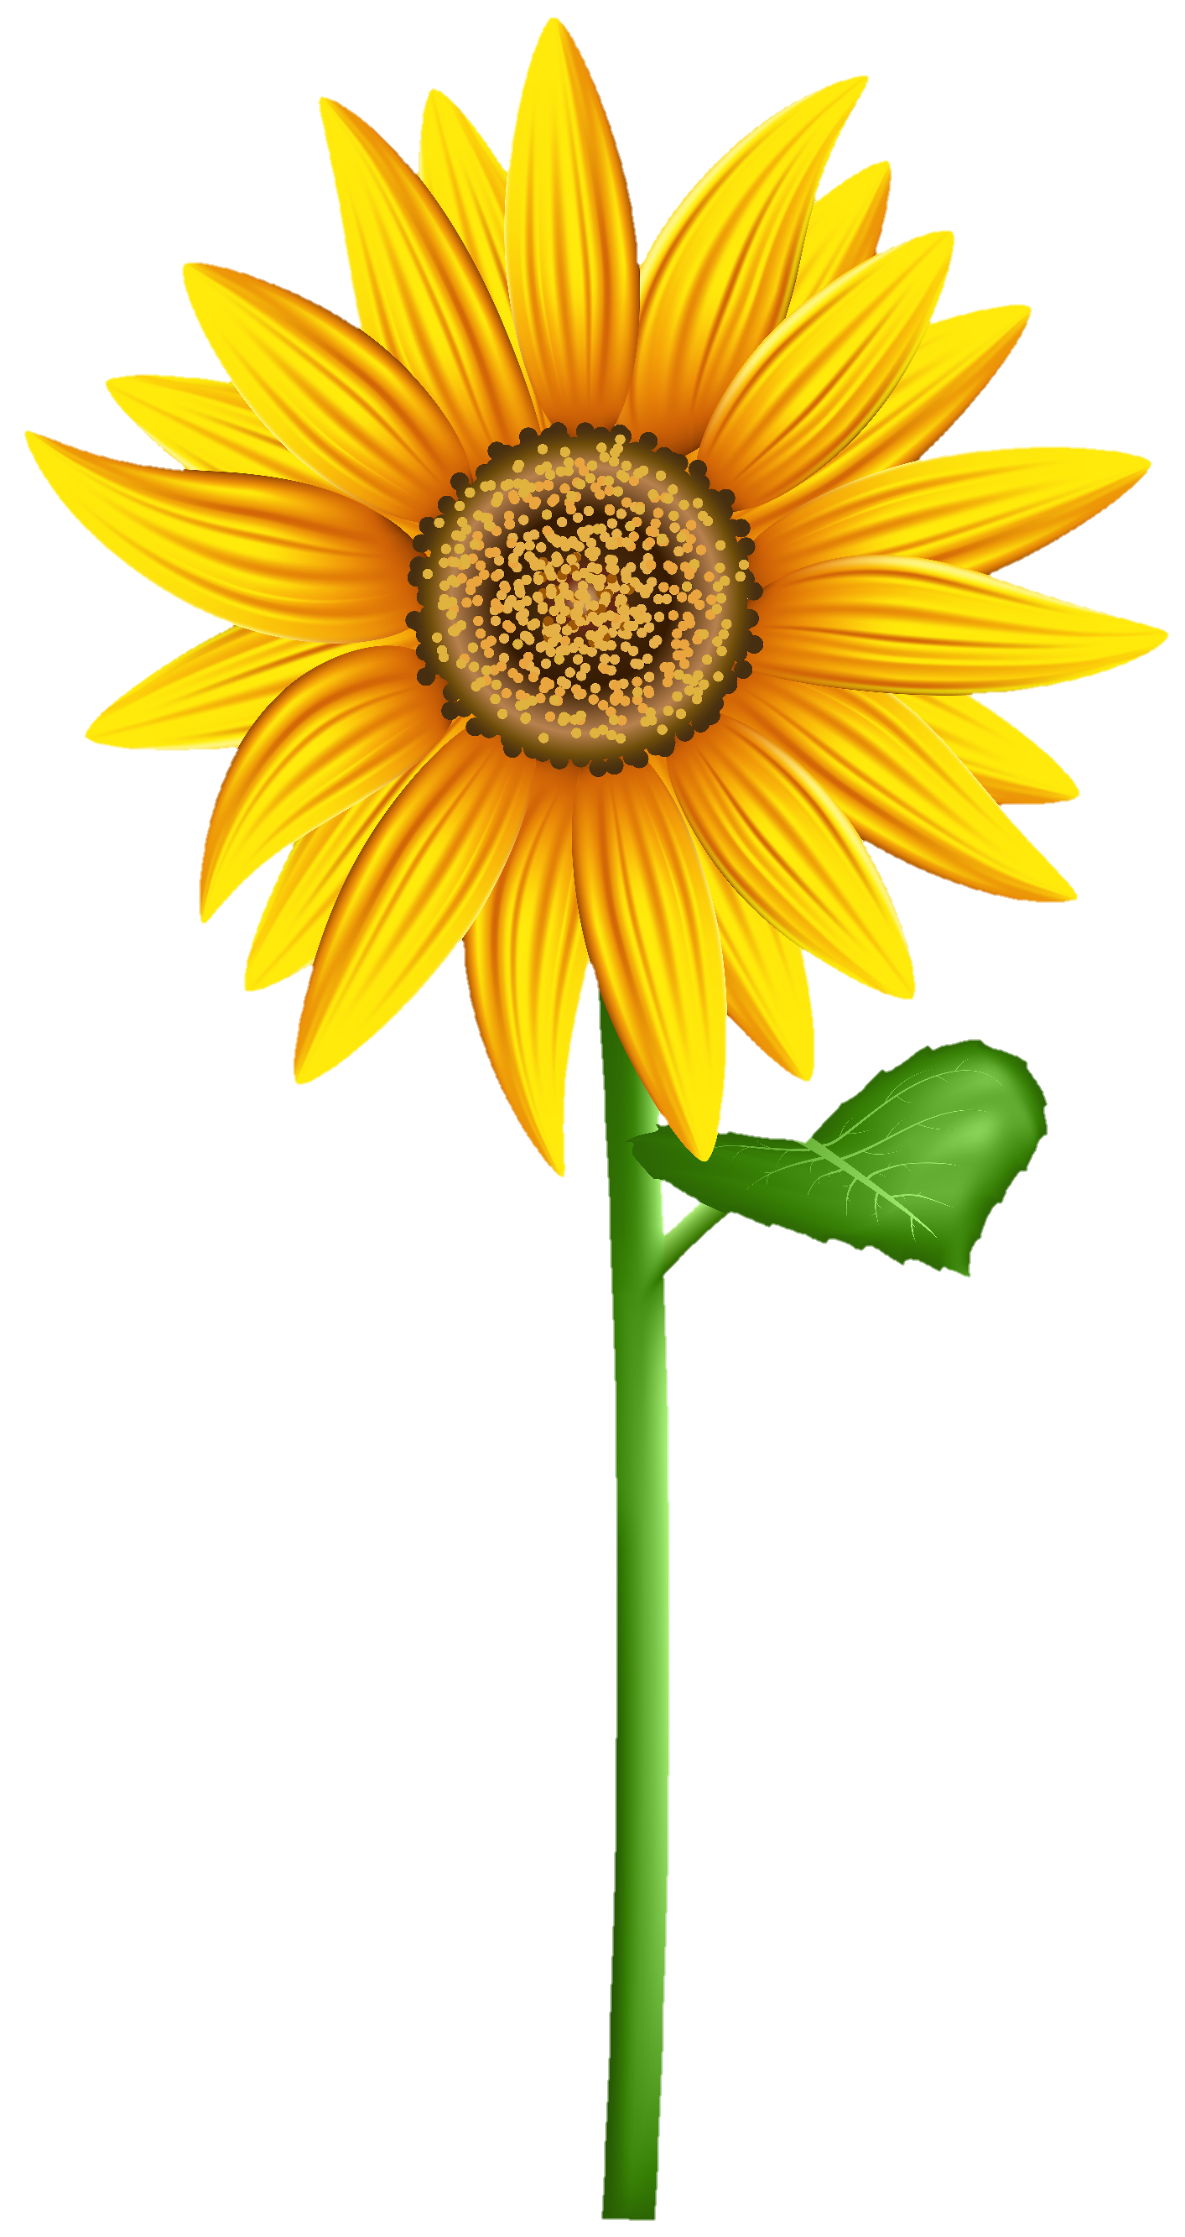 sunflower-png-image-from-pngfre-4-1